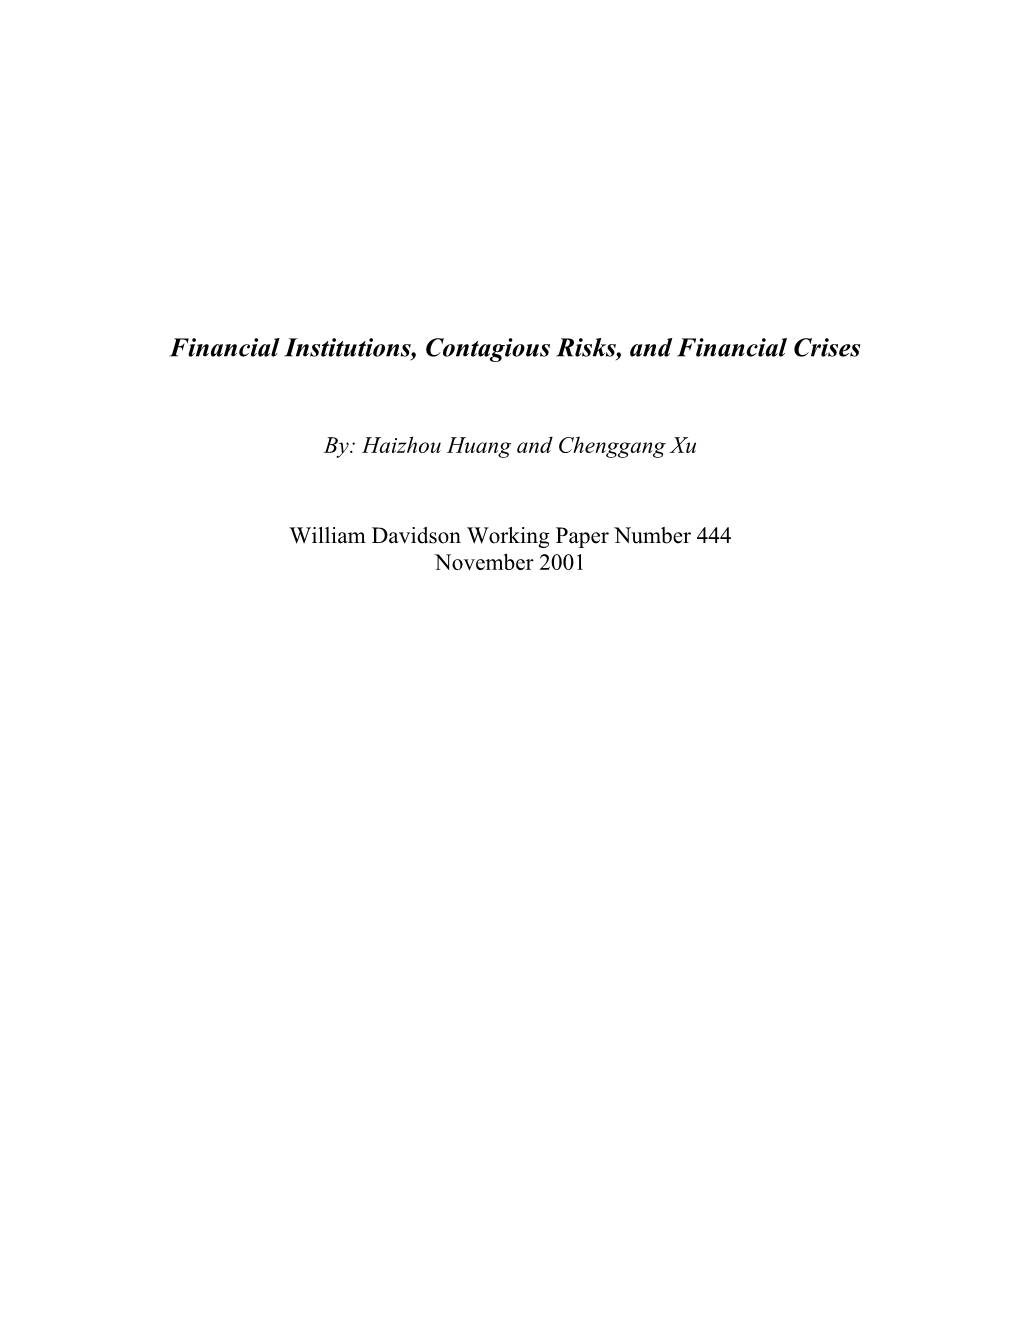 Financial Institutions, Contagious Risks, and Financial Crises